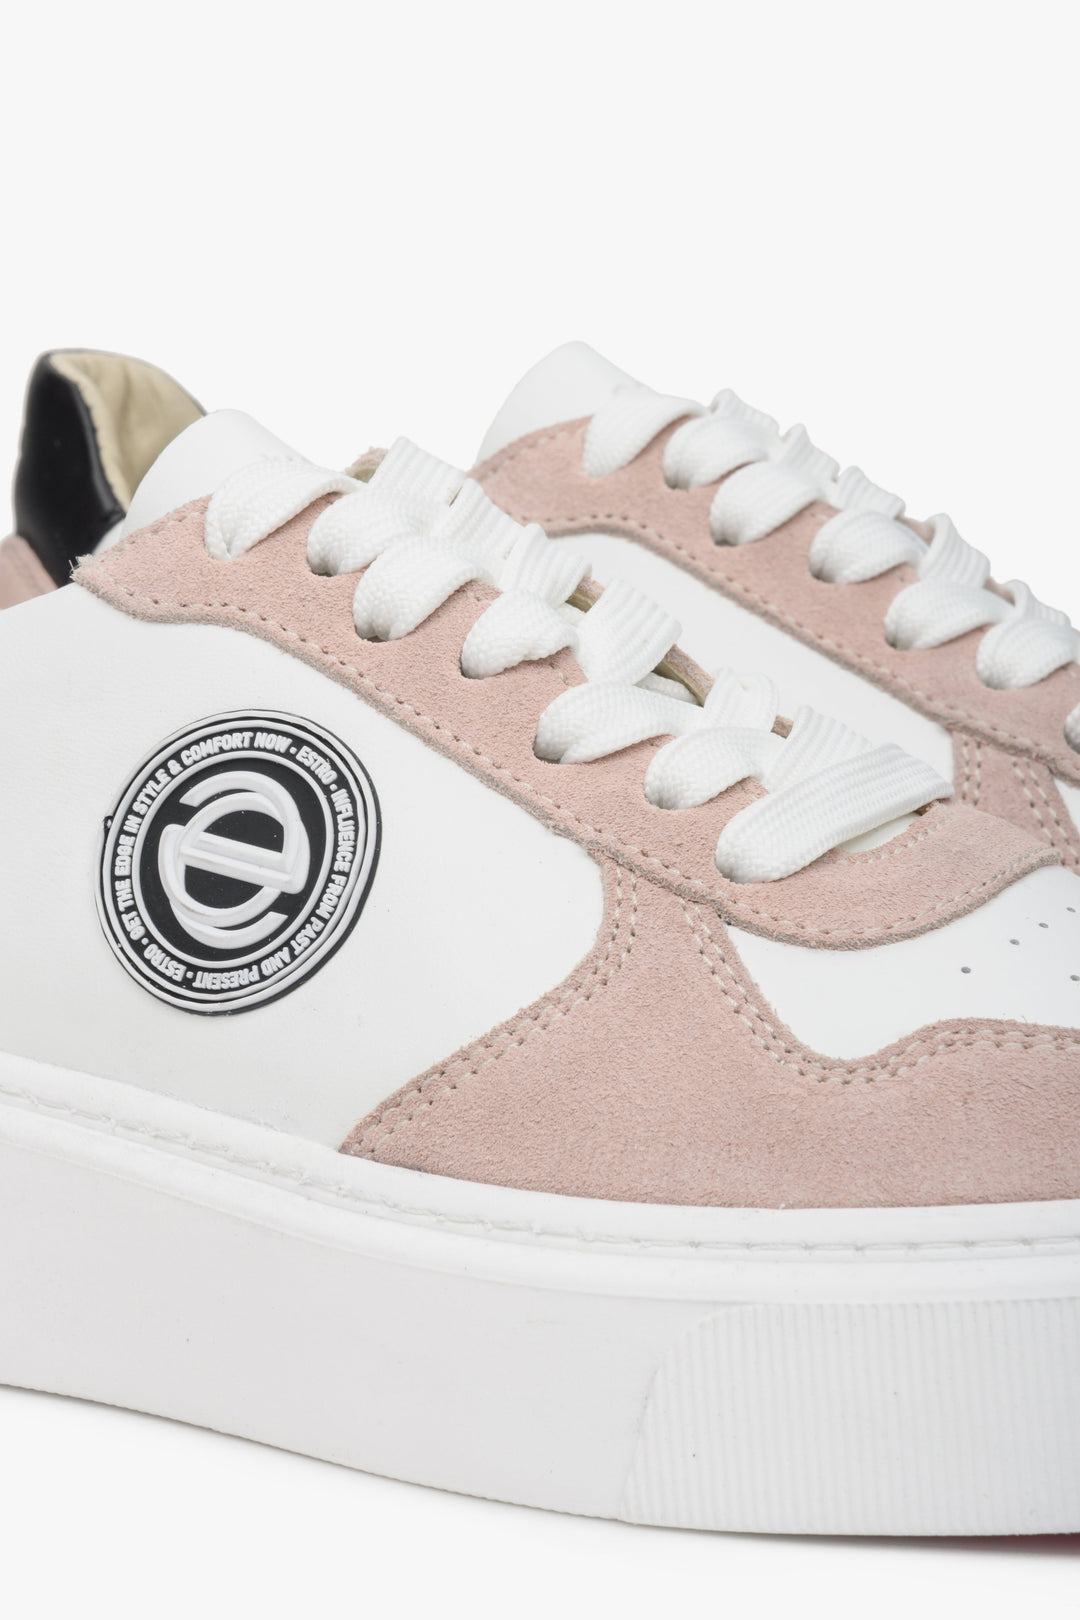 Estro velour and leather sneakers in white and pink. Close-up of decorative logo.